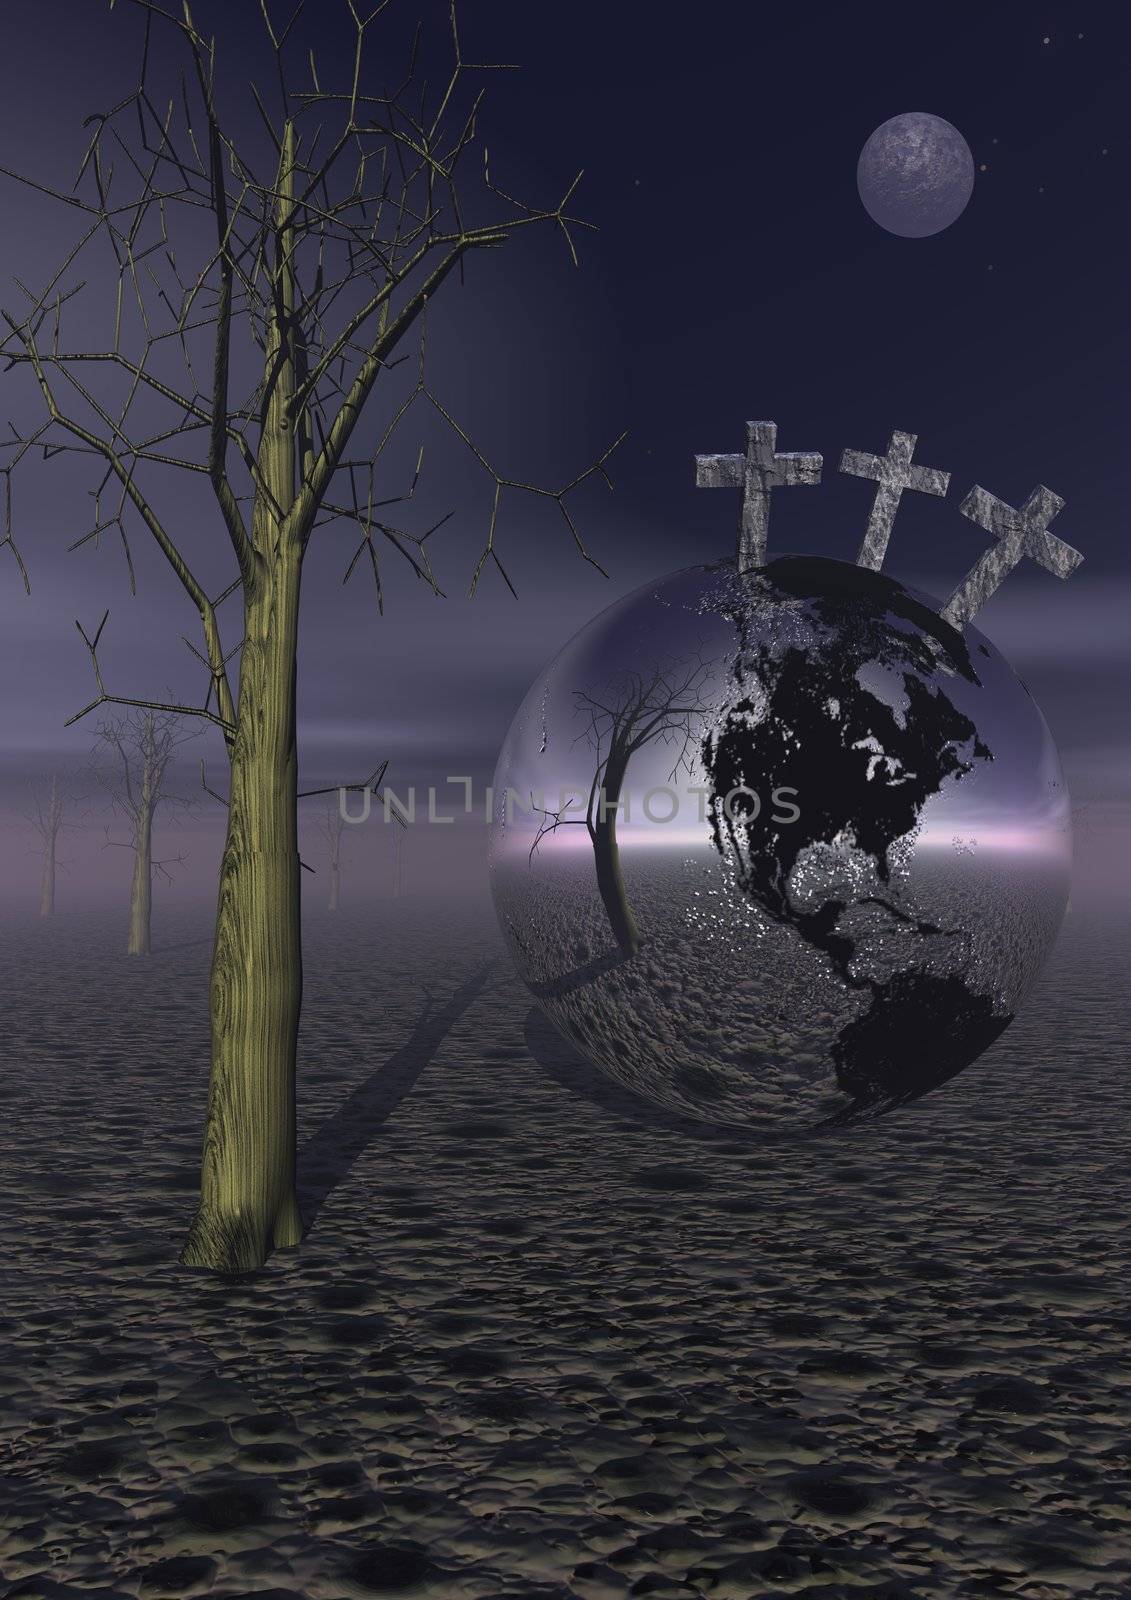 Three crosses for Golgotha on earth planet next to a dead tree by night with full moon